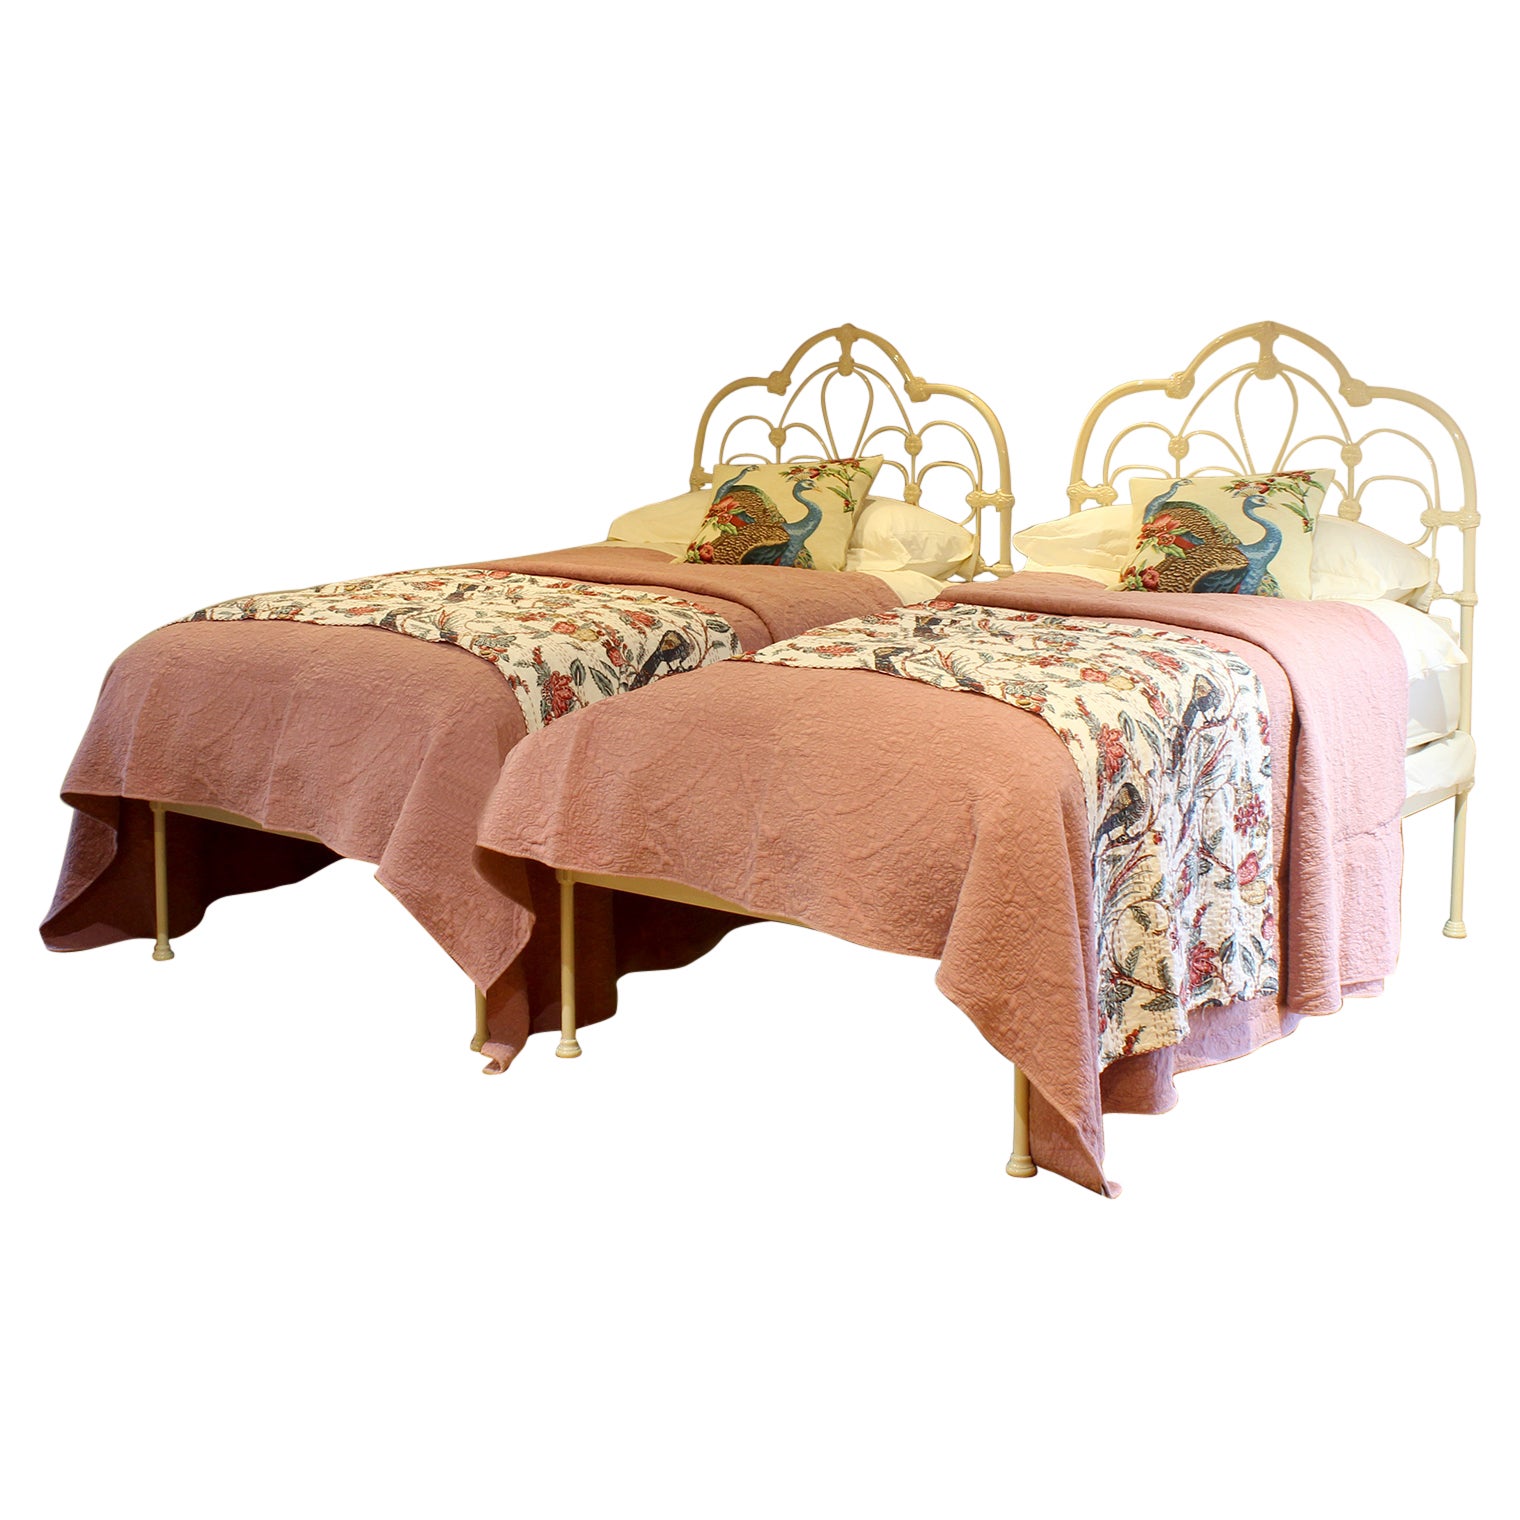 Matching Pair of Large Single Antique Beds in Cream MP60 For Sale